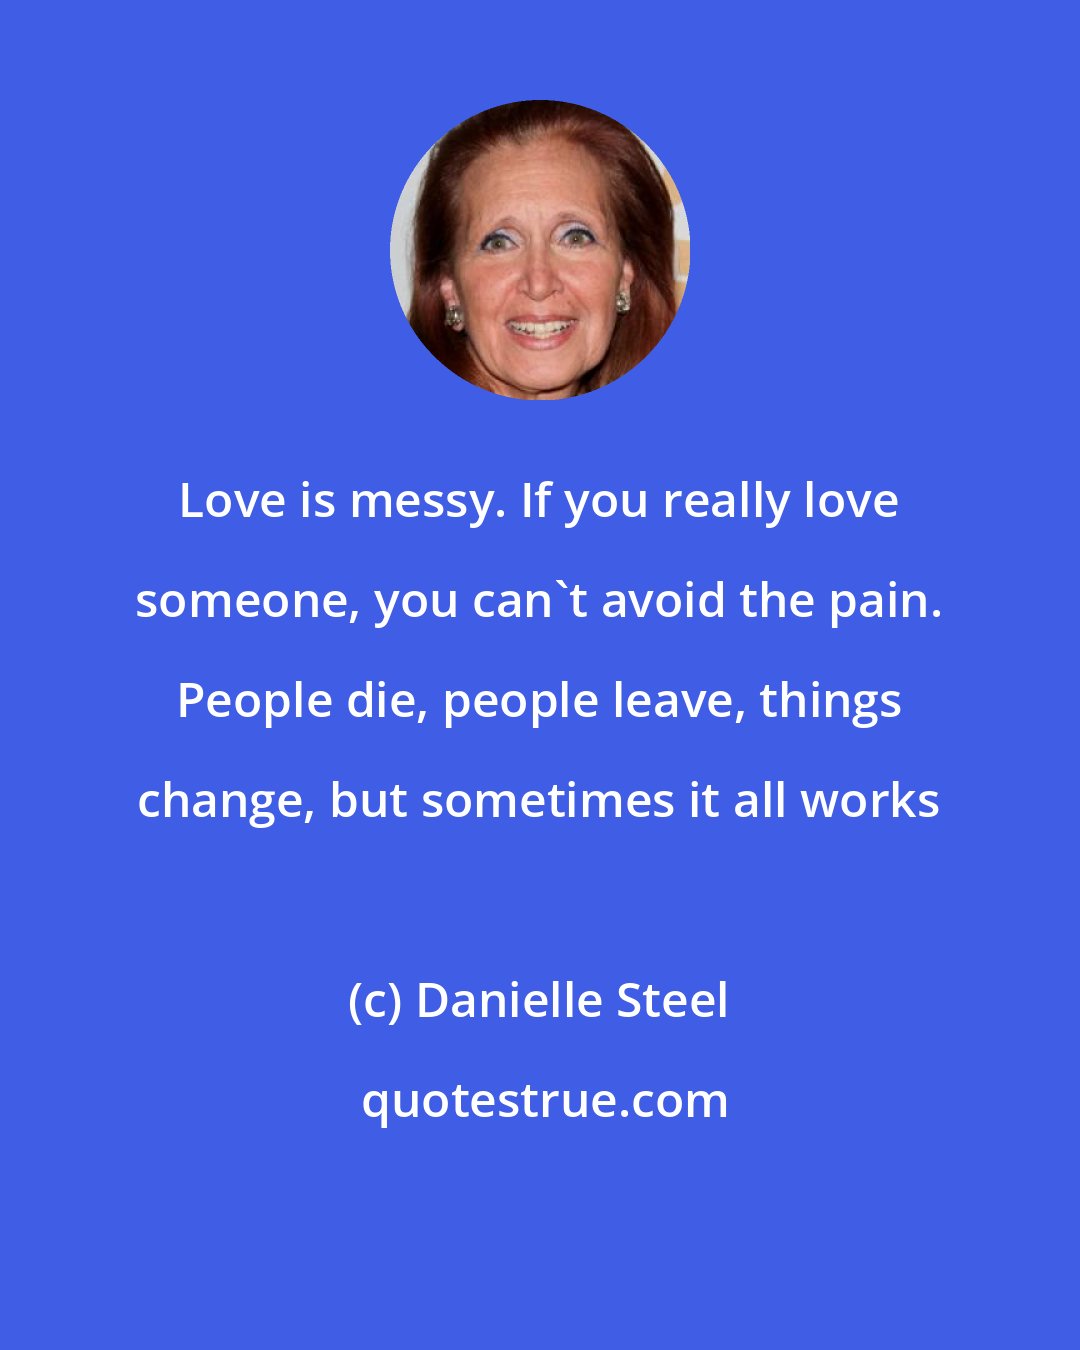 Danielle Steel: Love is messy. If you really love someone, you can't avoid the pain. People die, people leave, things change, but sometimes it all works